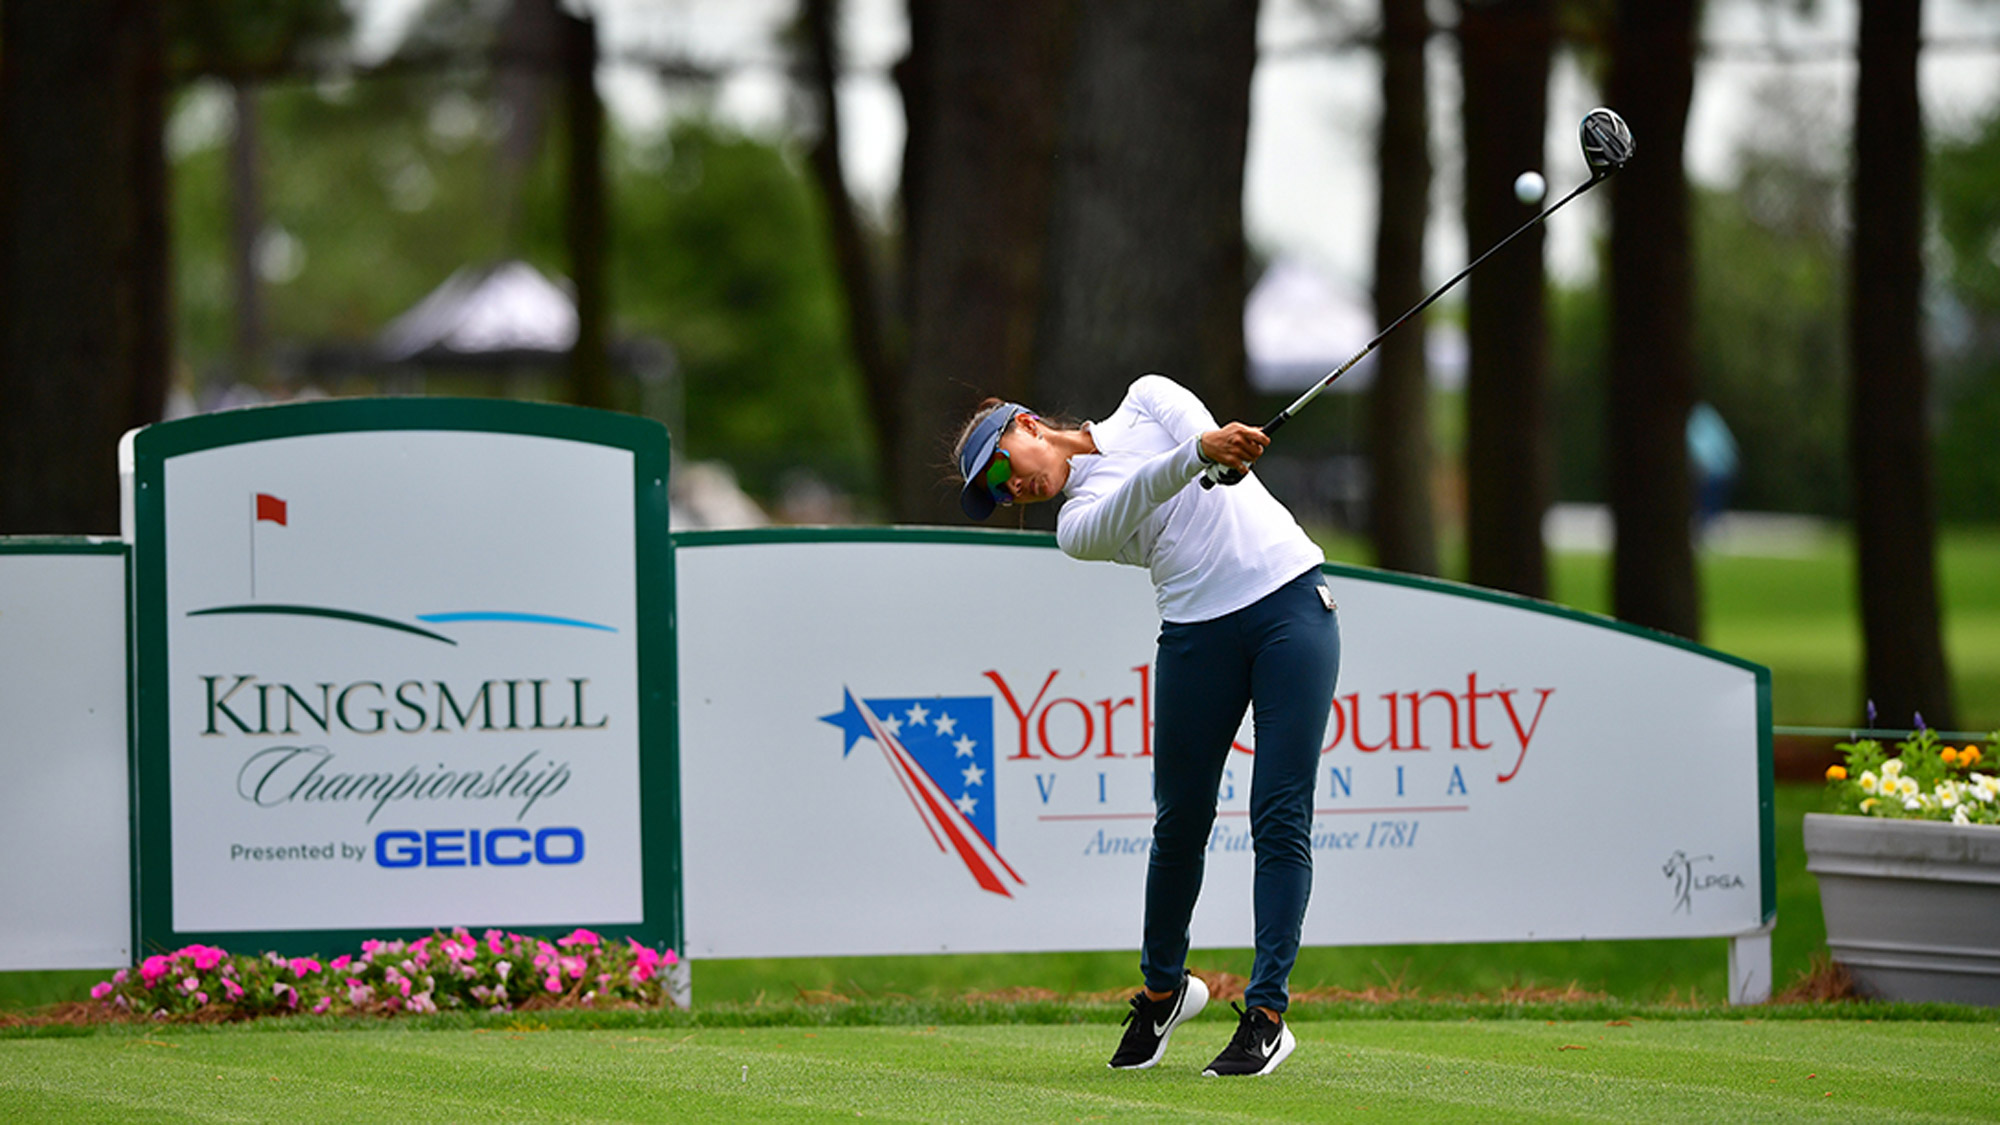 Jessy Tang in a Practice Round at the Kingsmill Championship 